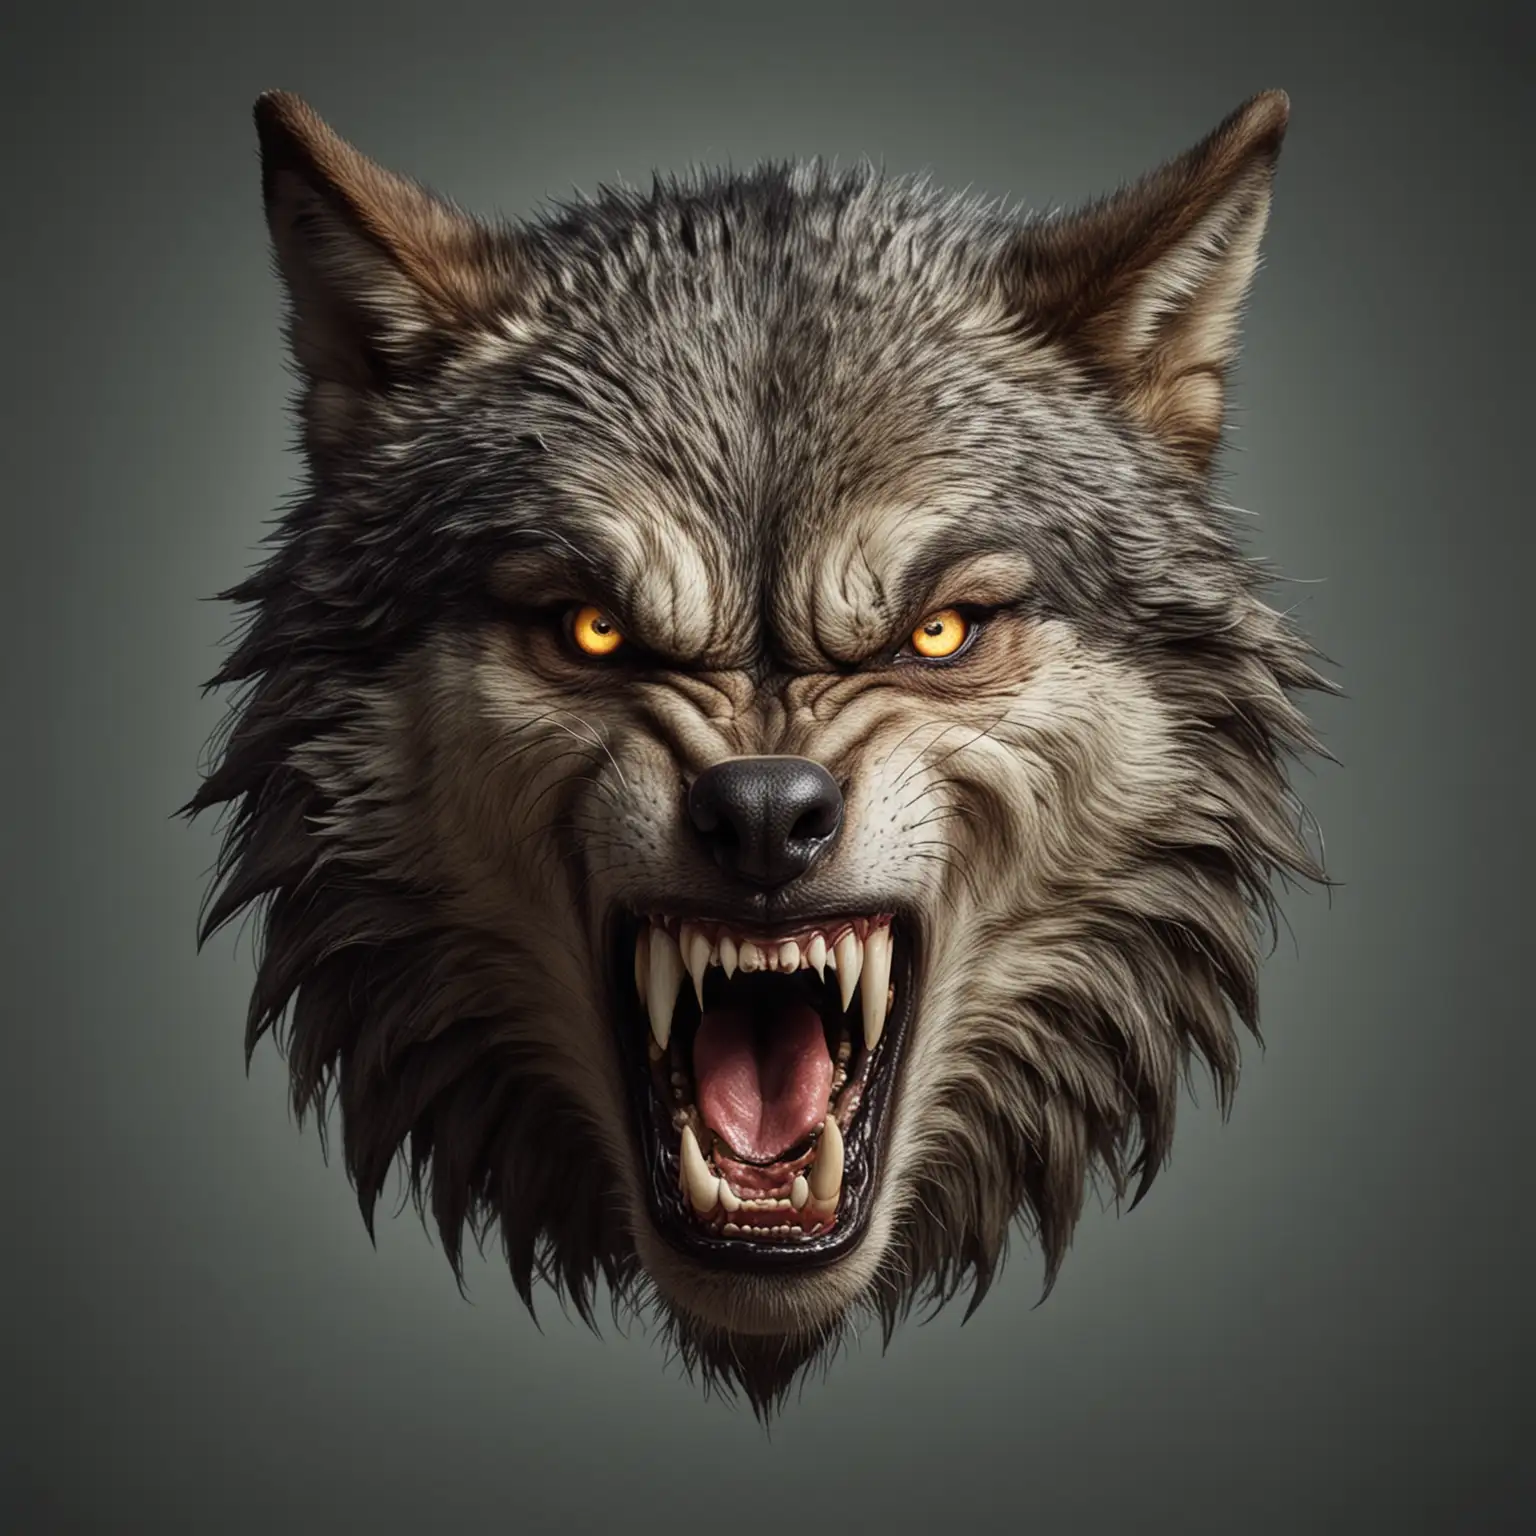 Big angry wolf head with open mouth and fangs out